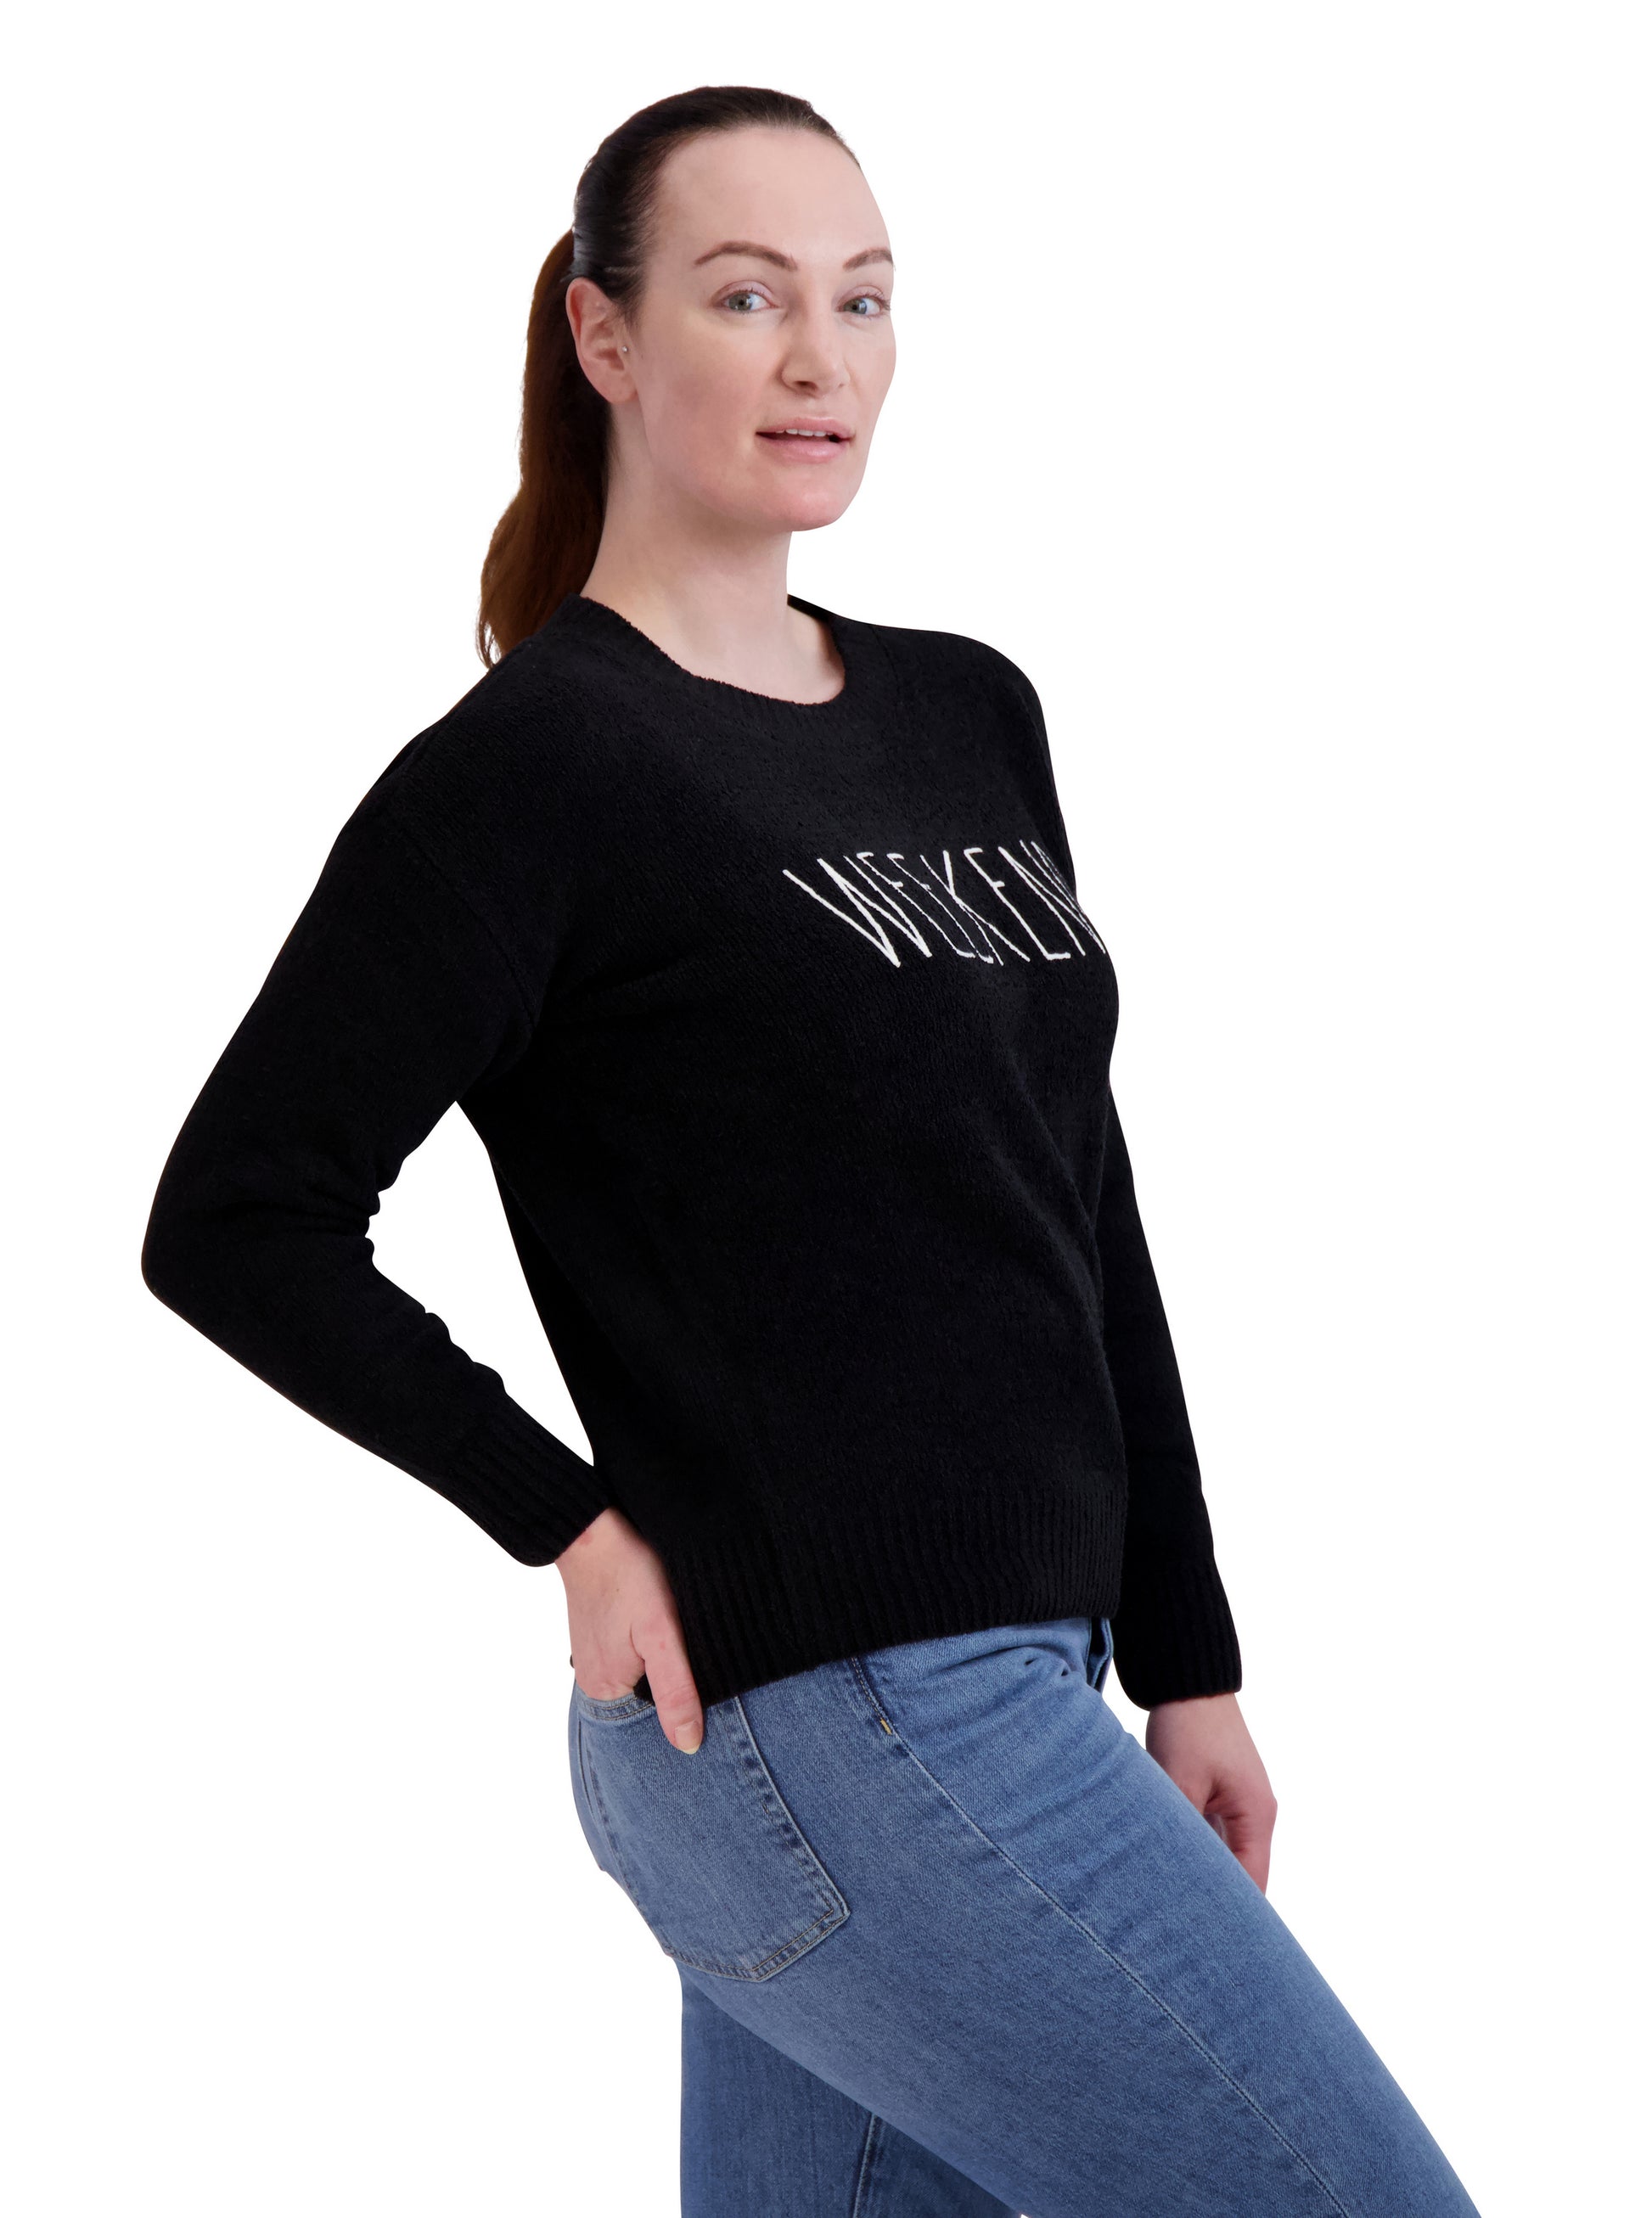 Women's Embroidered "WEEKEND" Chenille Sweater - Rae Dunn Wear - W Sweater